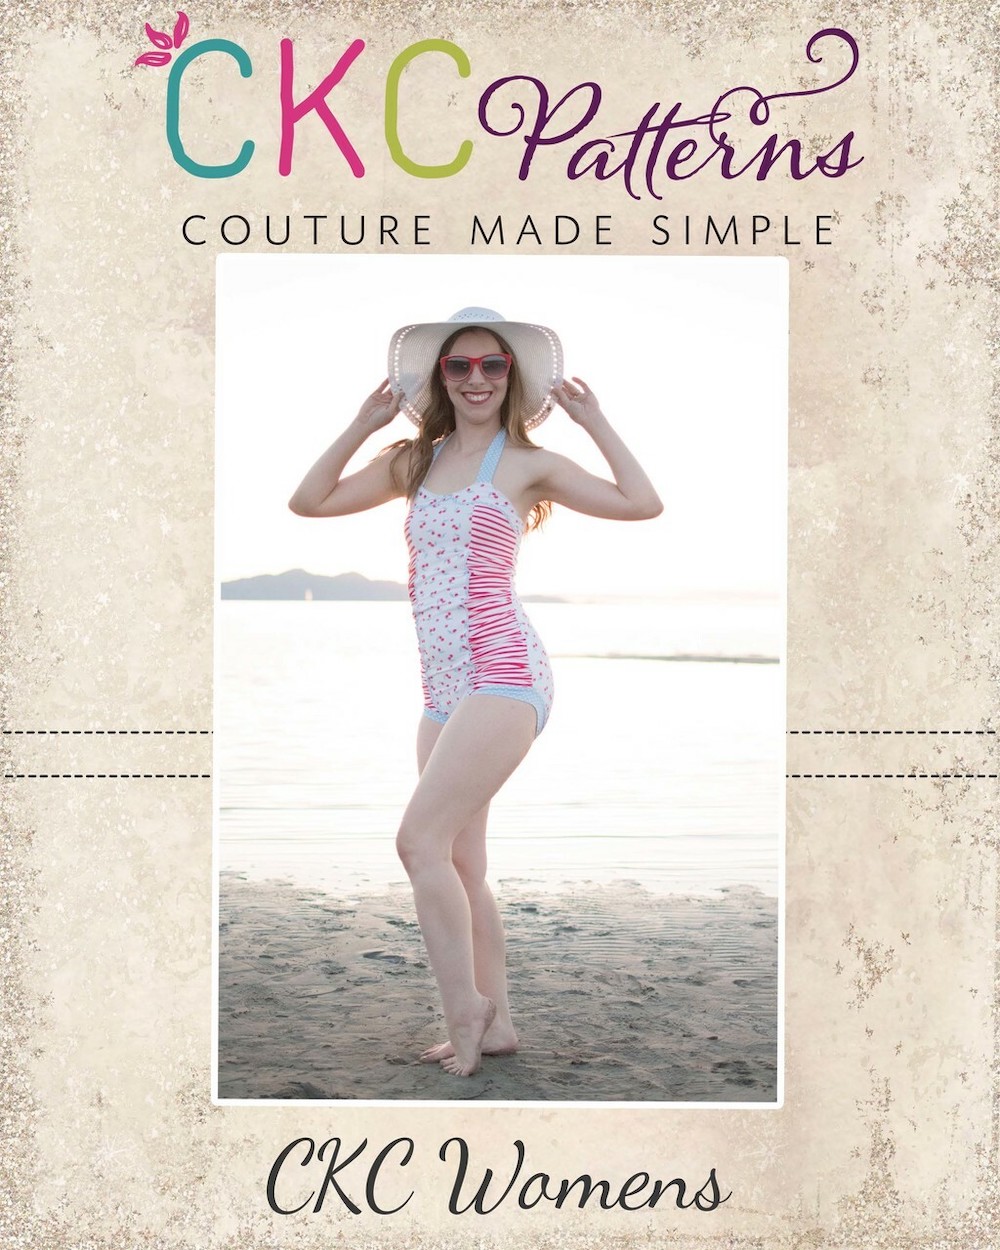 30 One-Piece Patterns for Swimwear Sewing – Tailor Made Blog